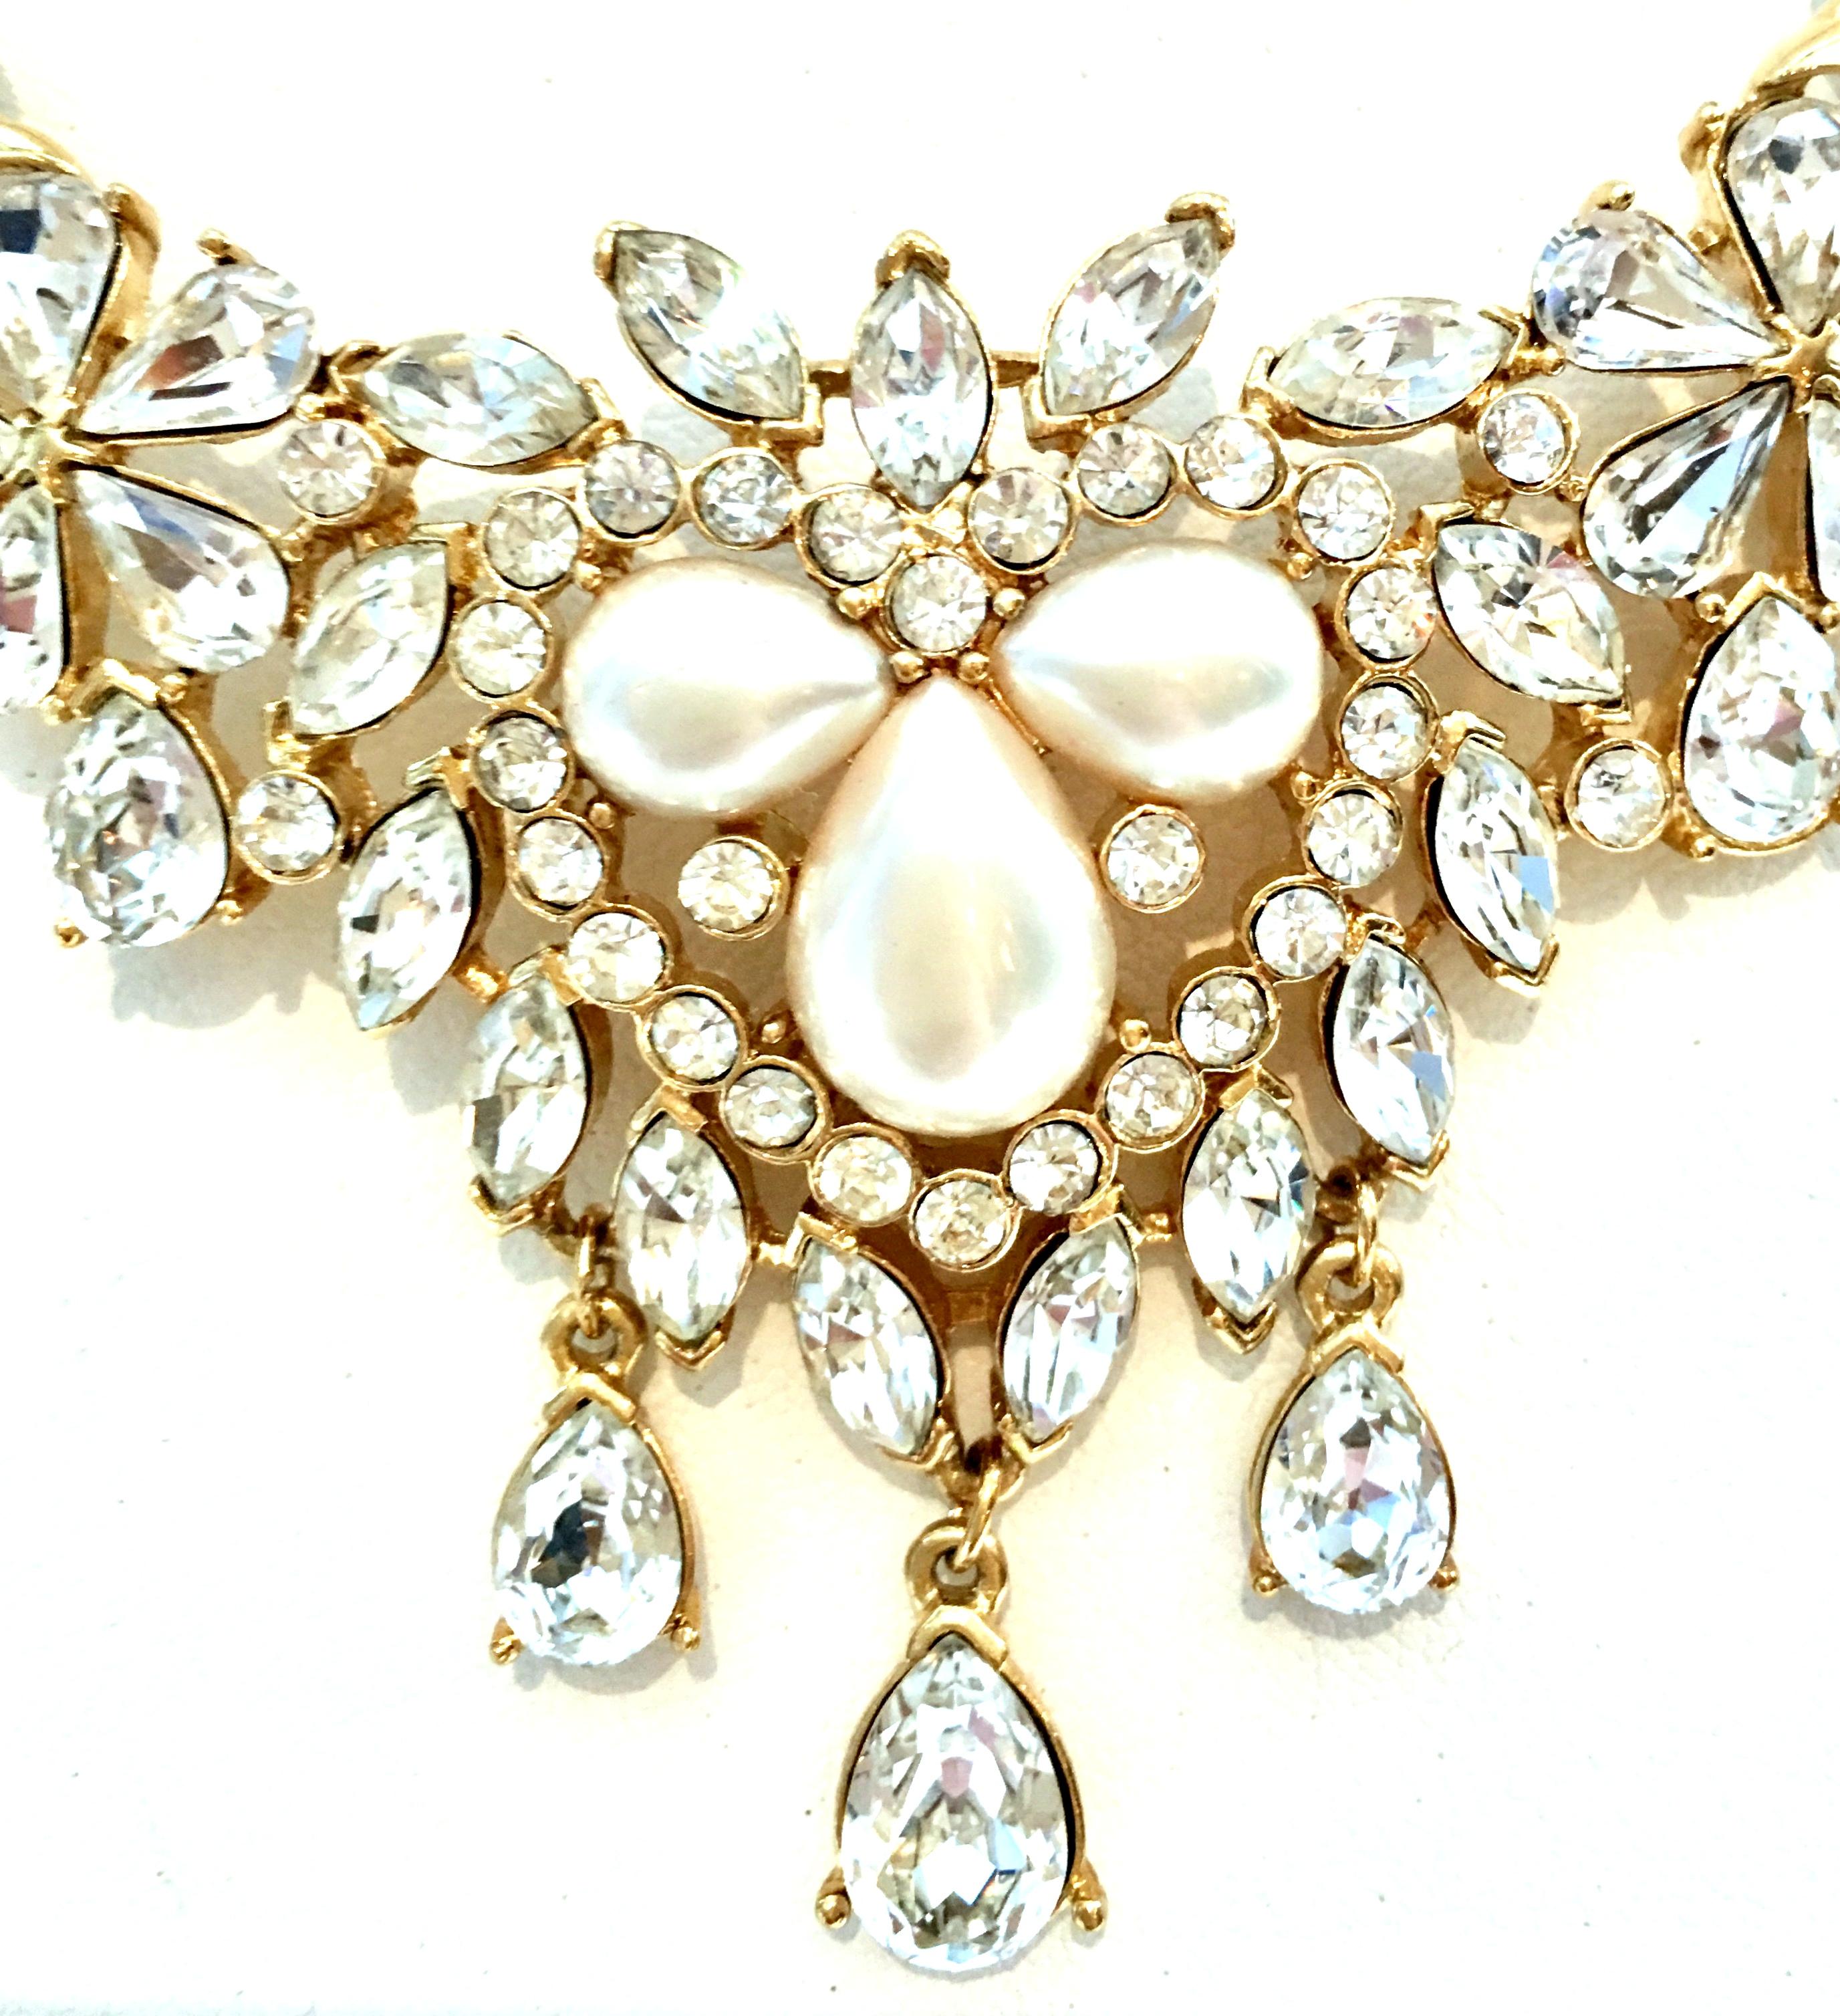 20th Century Gold Austrian Crystal & Pearl Necklace By Matsumoto For Trifari 1